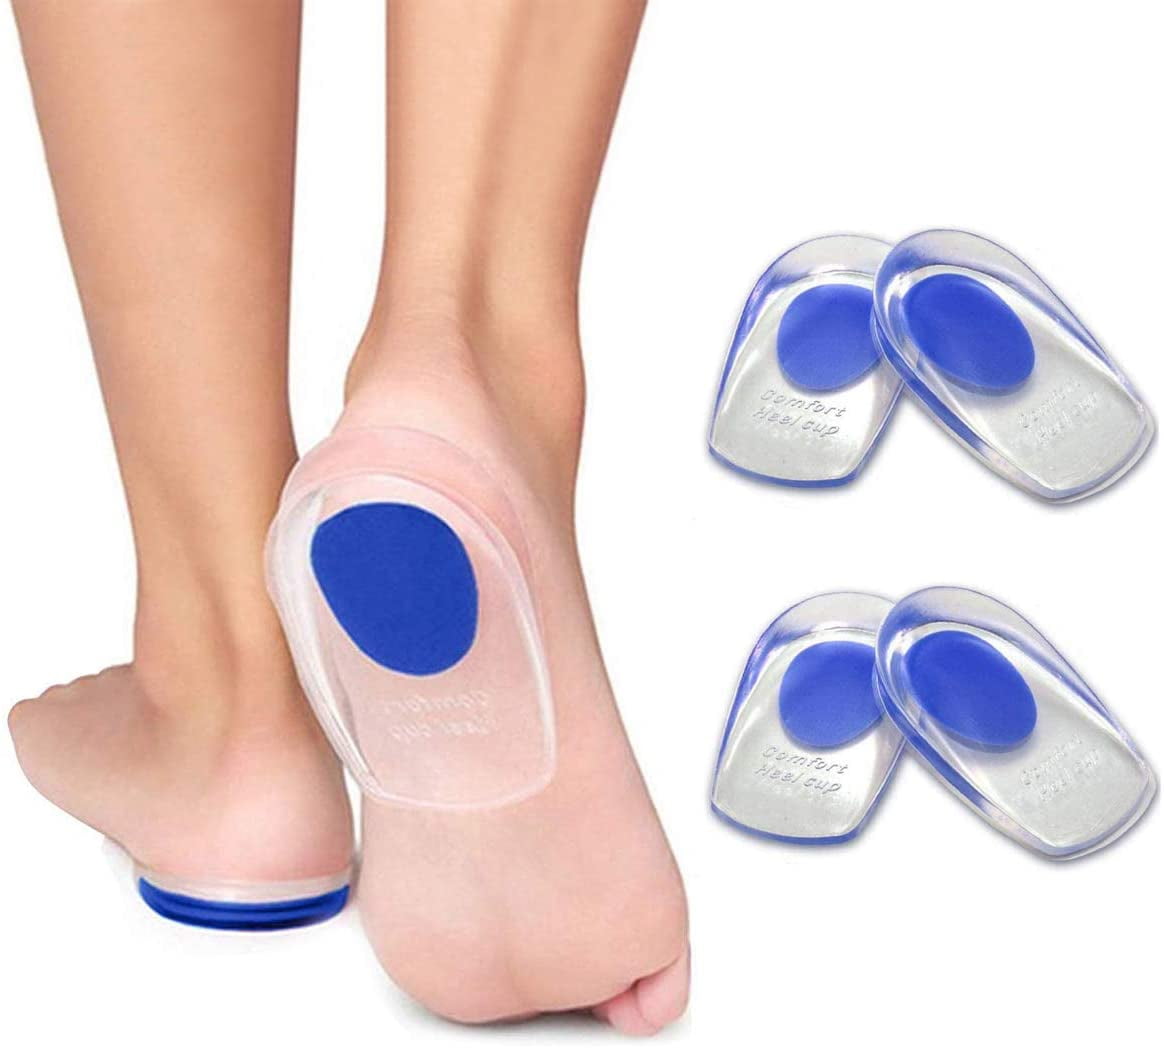 White Heel Lift Insoles Silicone High Increase Shoe Inserts Plantar Fasciitis Heel Protector 